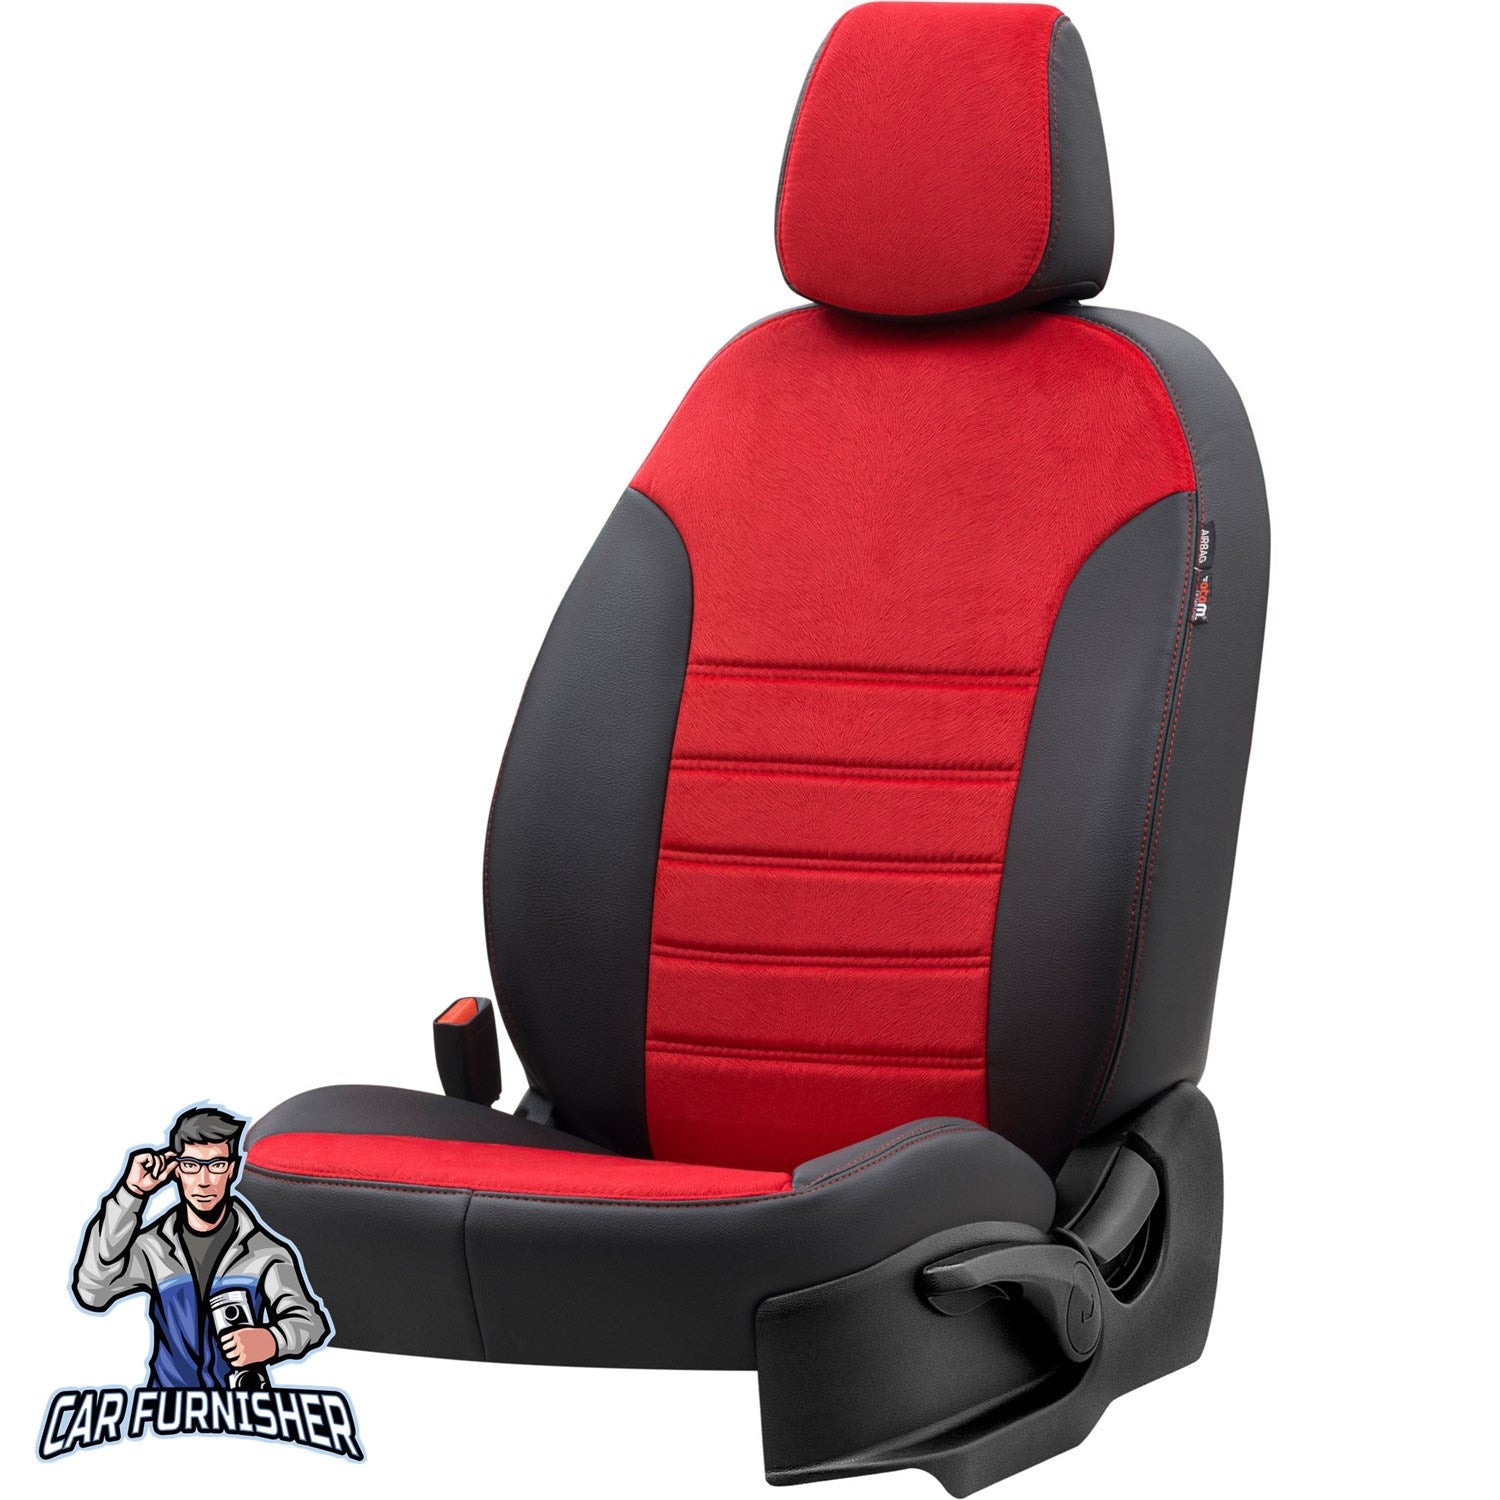 Audi A1 Car Seat Cover 2011-2016 Custom Made London Design Red Full Set (5 Seats + Handrest) Leather & Fabric